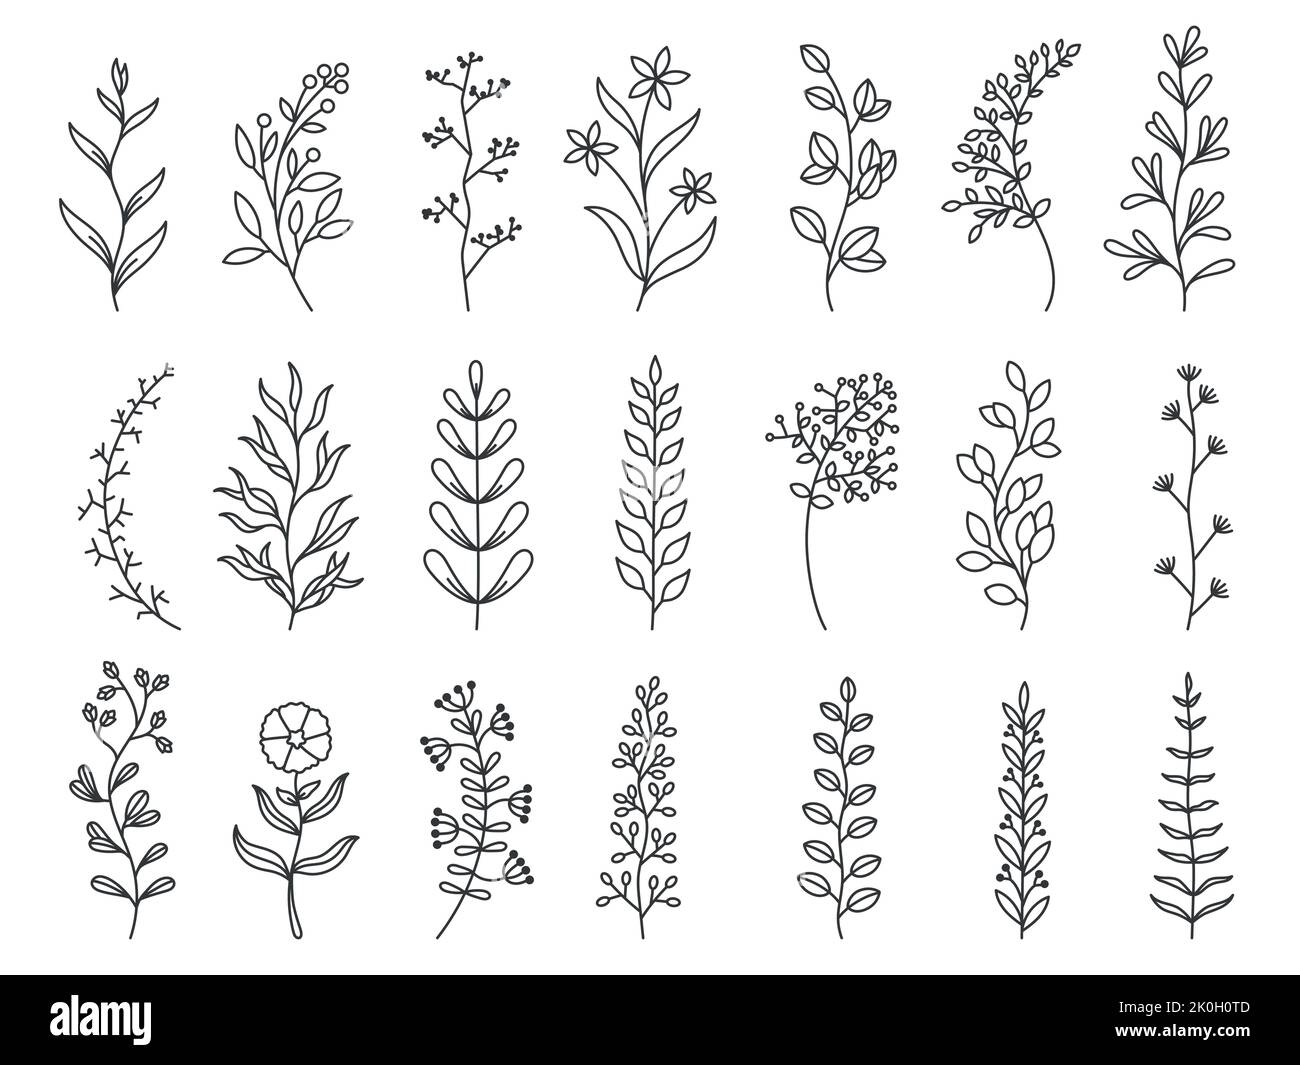 Herbal art. Doodle botanical decorative elements for tattoo, invitation and greeting cards, line sketch of forest branches. Vector minimal hand drawn Stock Vector